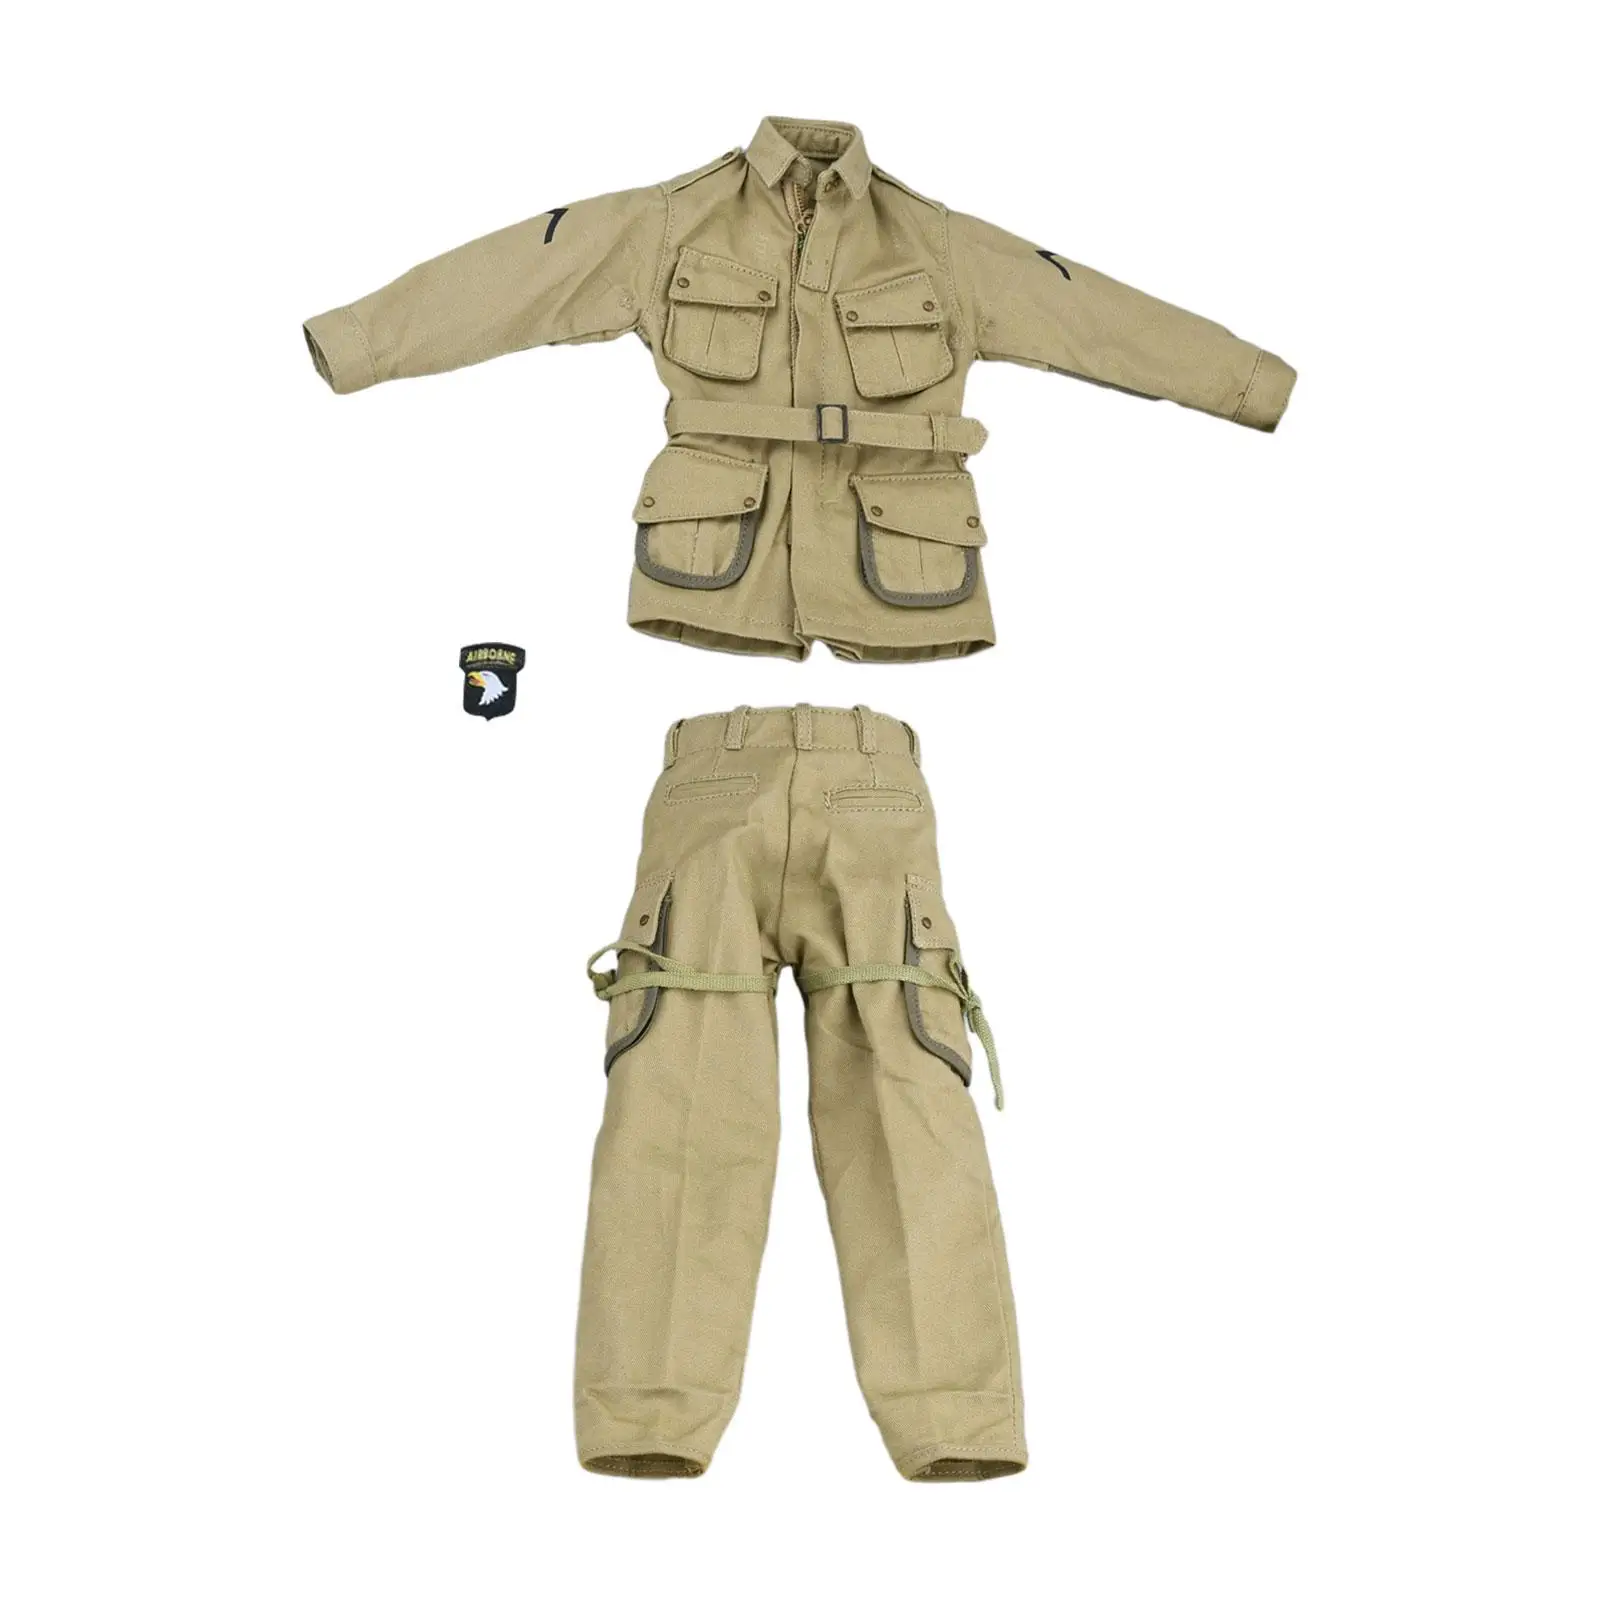 1/6 Figure Clothes Miniature Soldier Costume for 12`` inch Soldier Figures